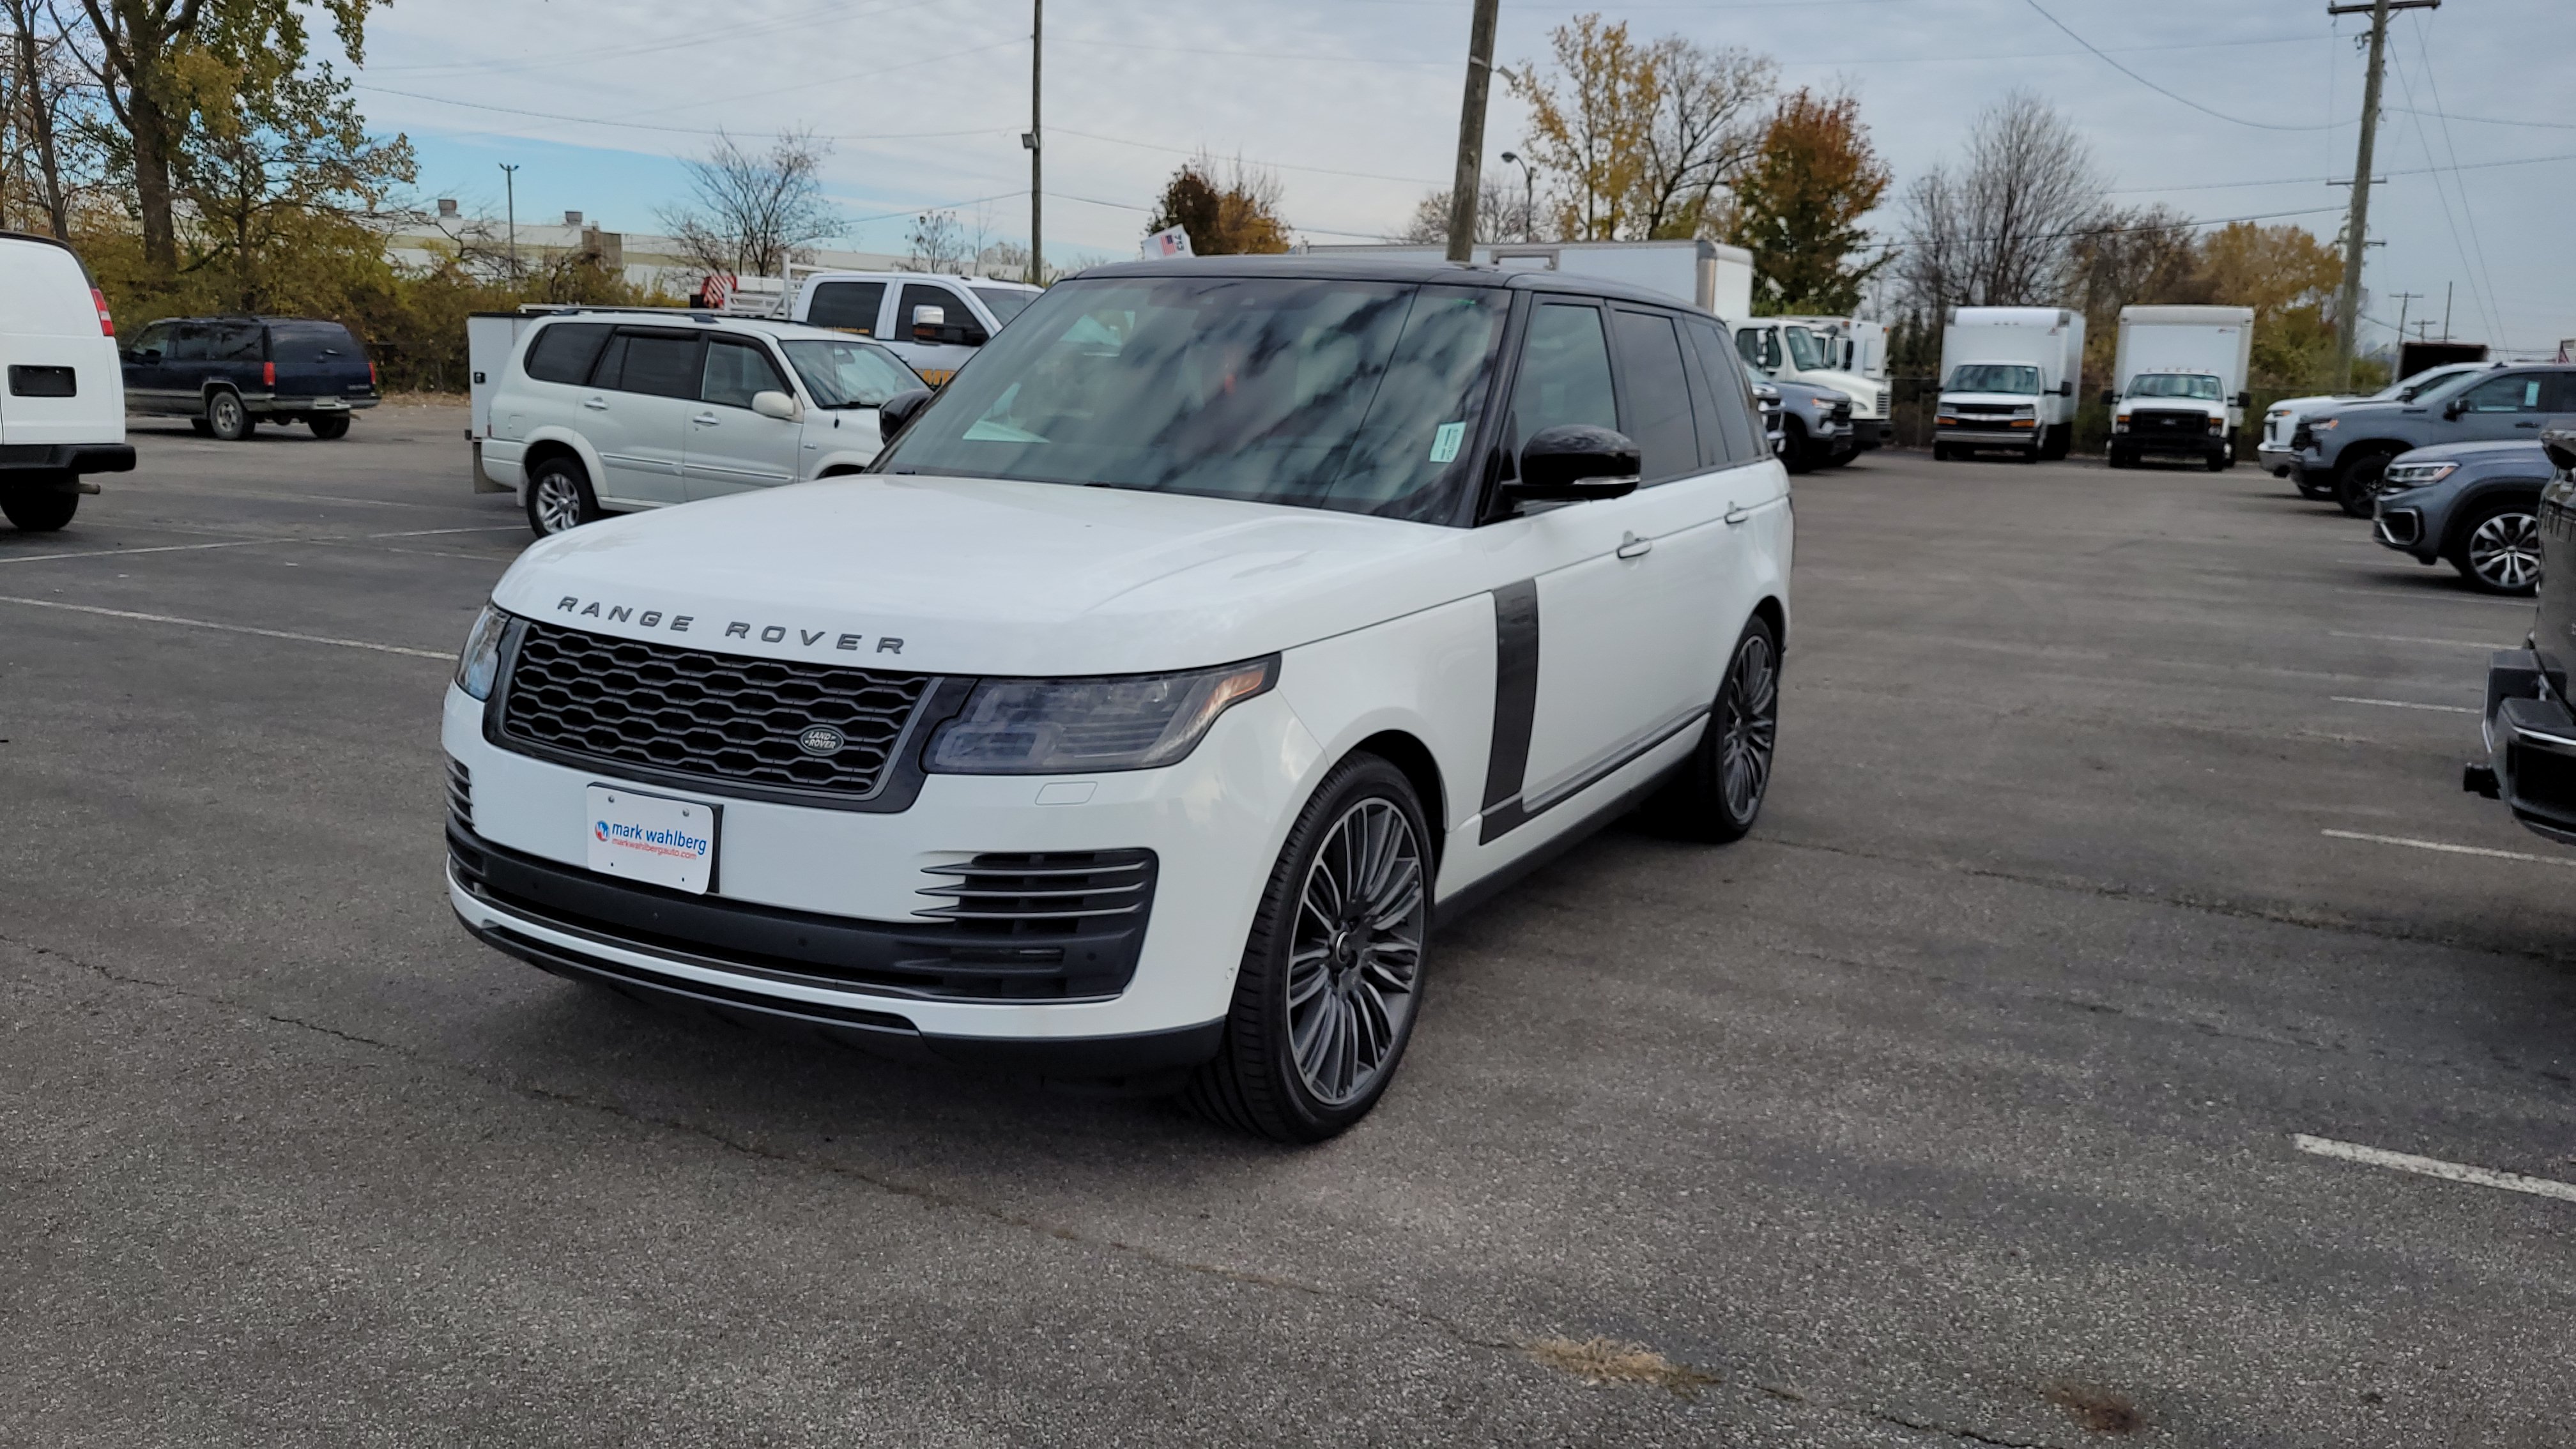 2019 Land Rover Range Rover 5.0L V8 Supercharged Autobiography 37